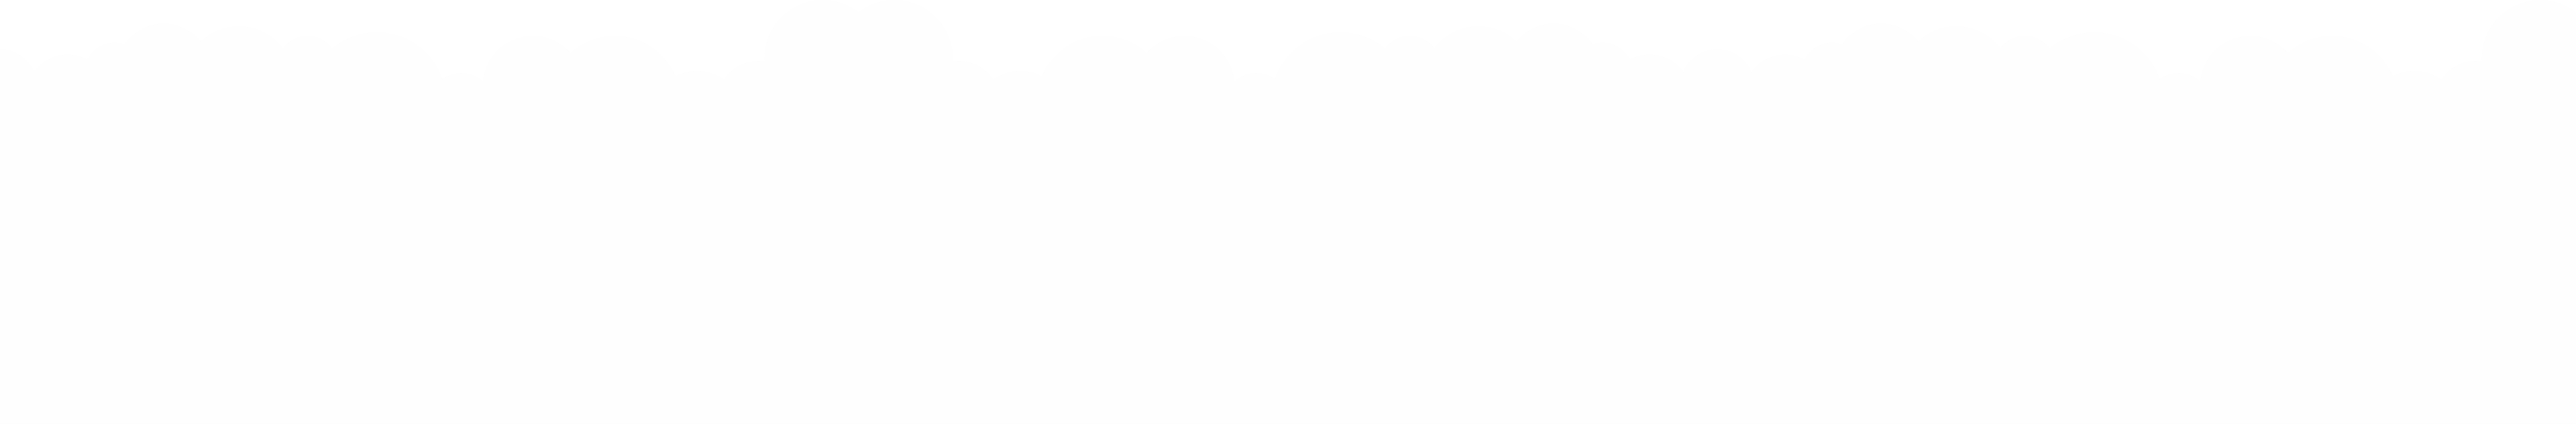 Cloud Background Layer 1